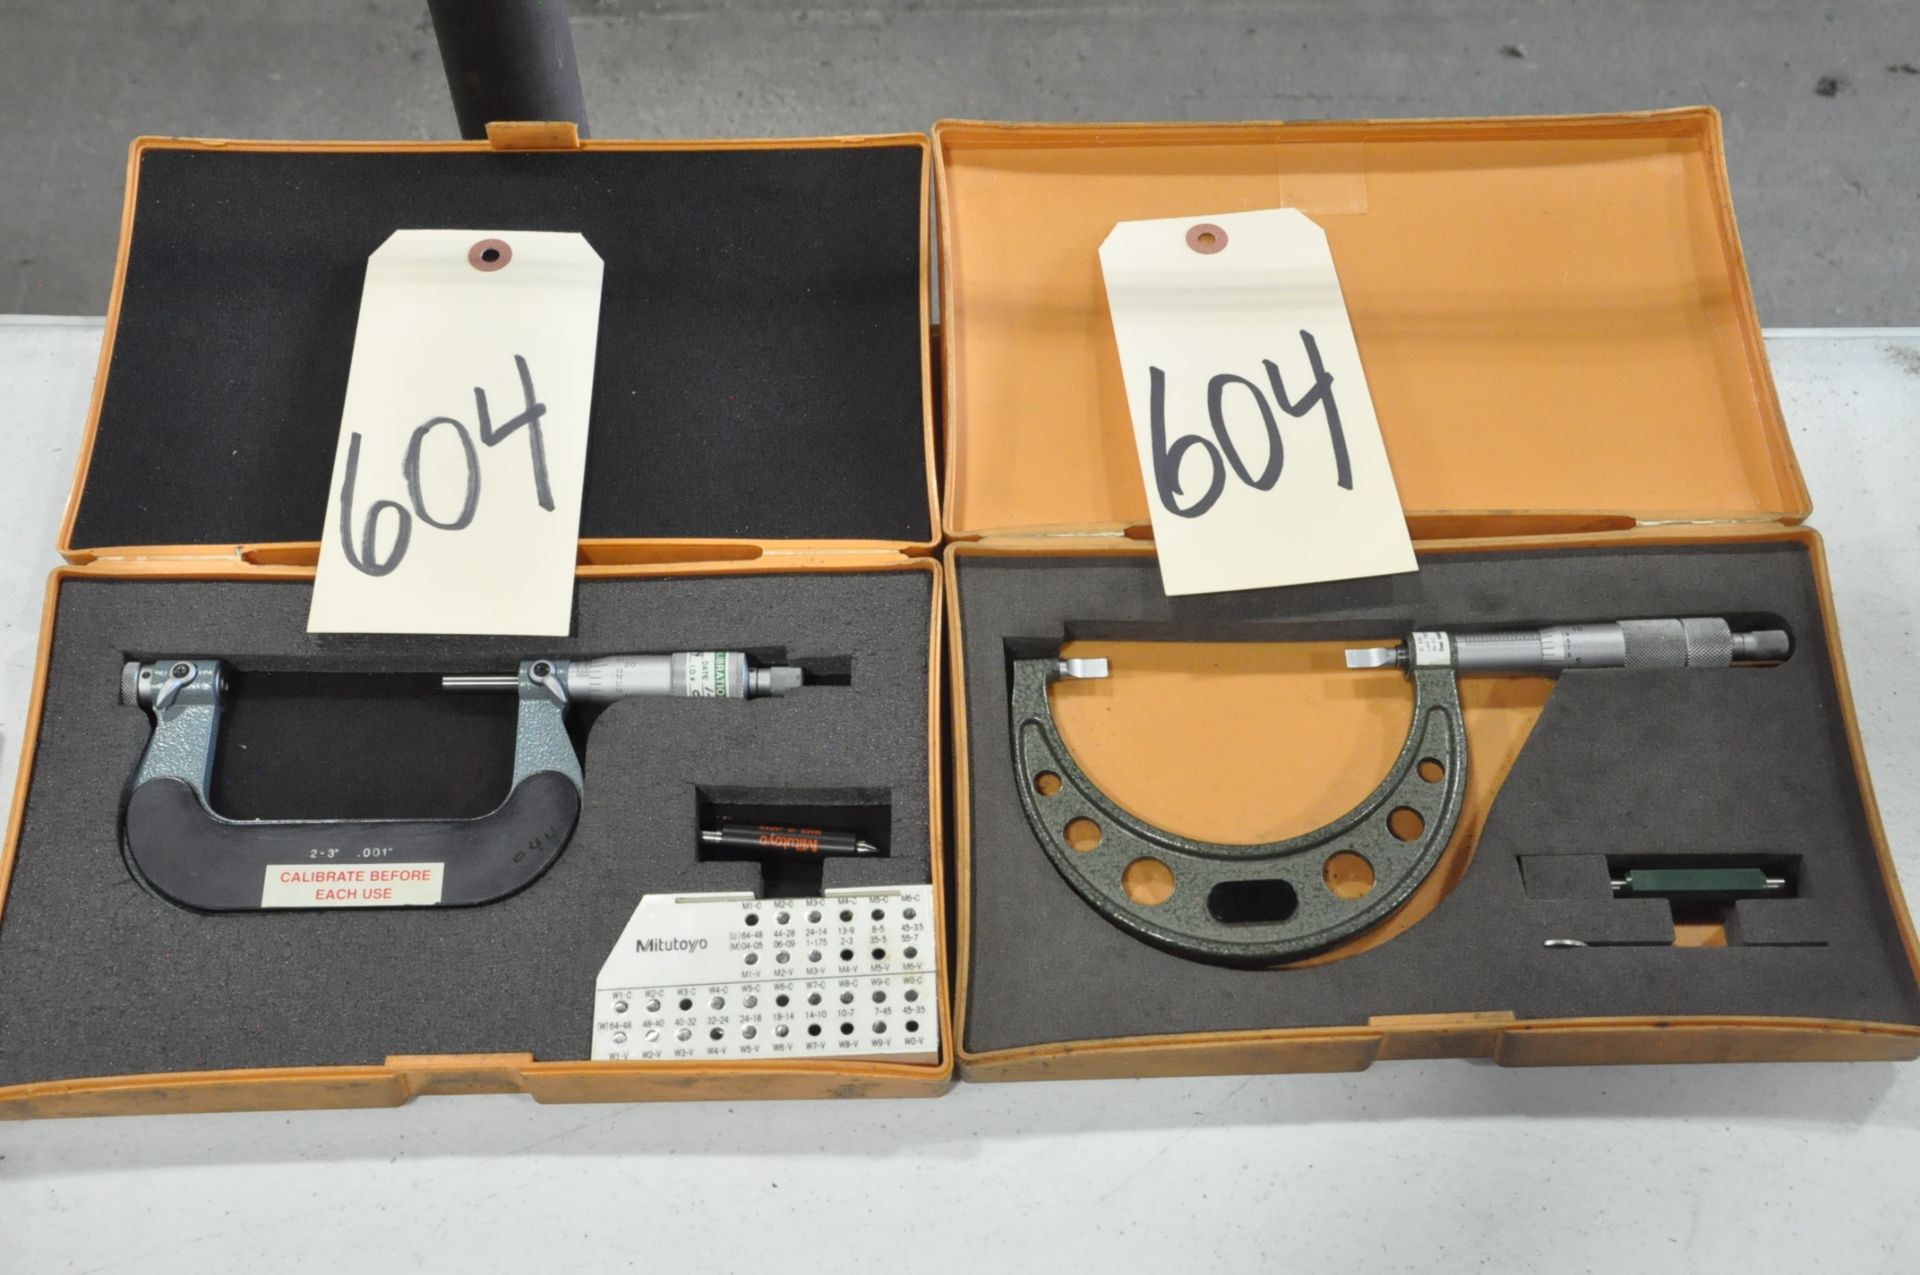 Lot-(2) Asst'd Micrometers with Cases - Image 2 of 2